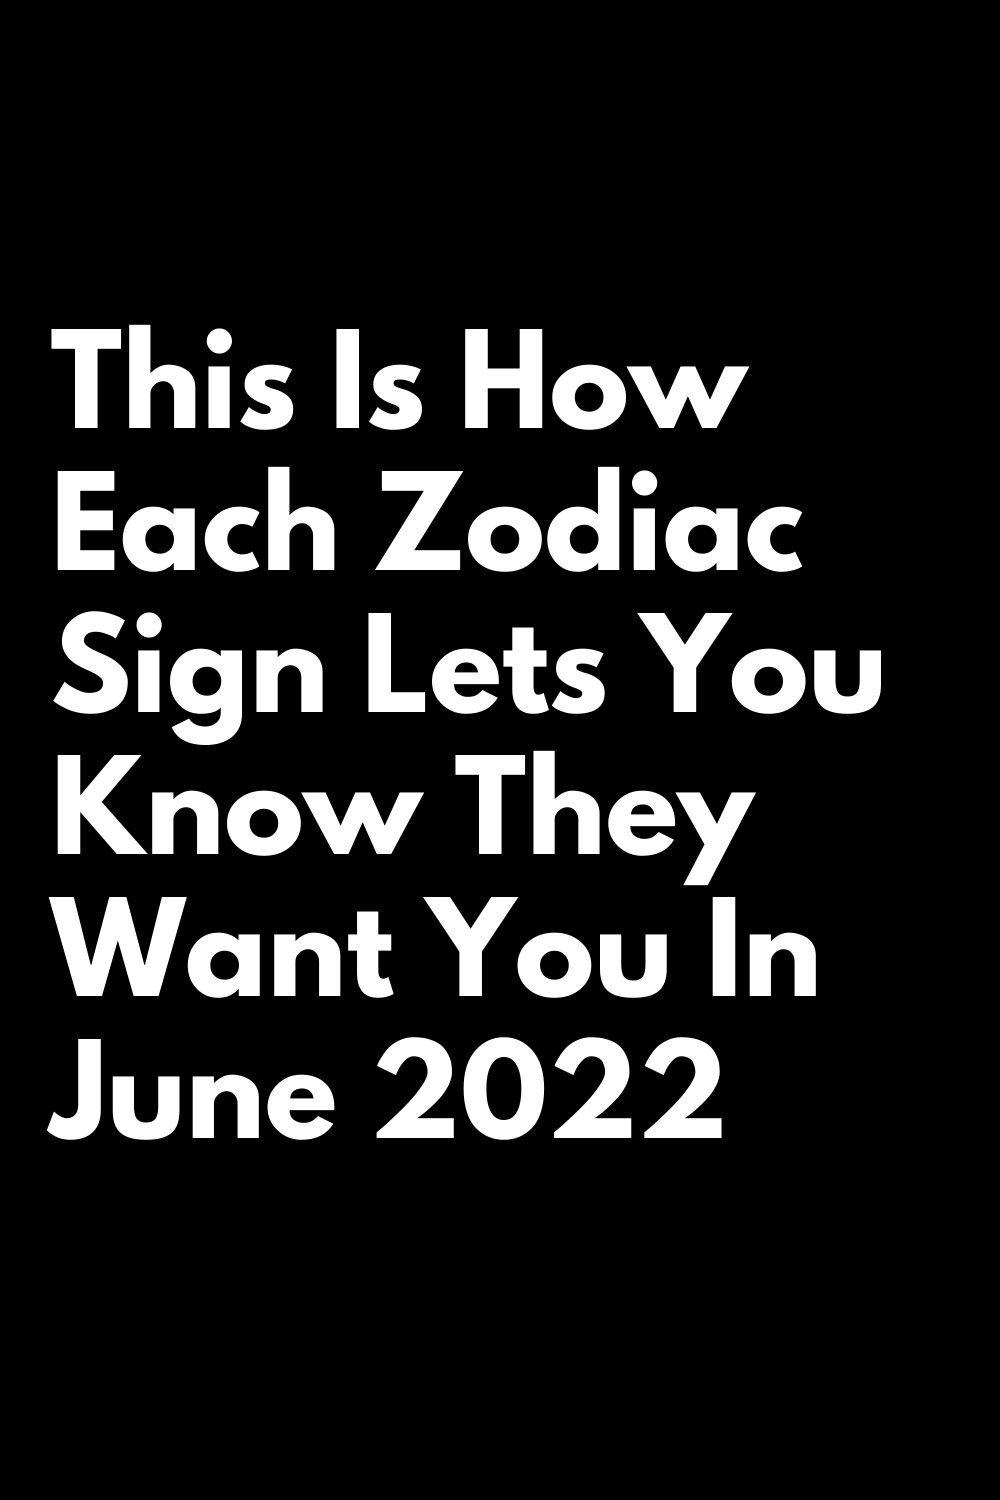 This Is How Each Zodiac Sign Lets You Know They Want You In June 2022 ...